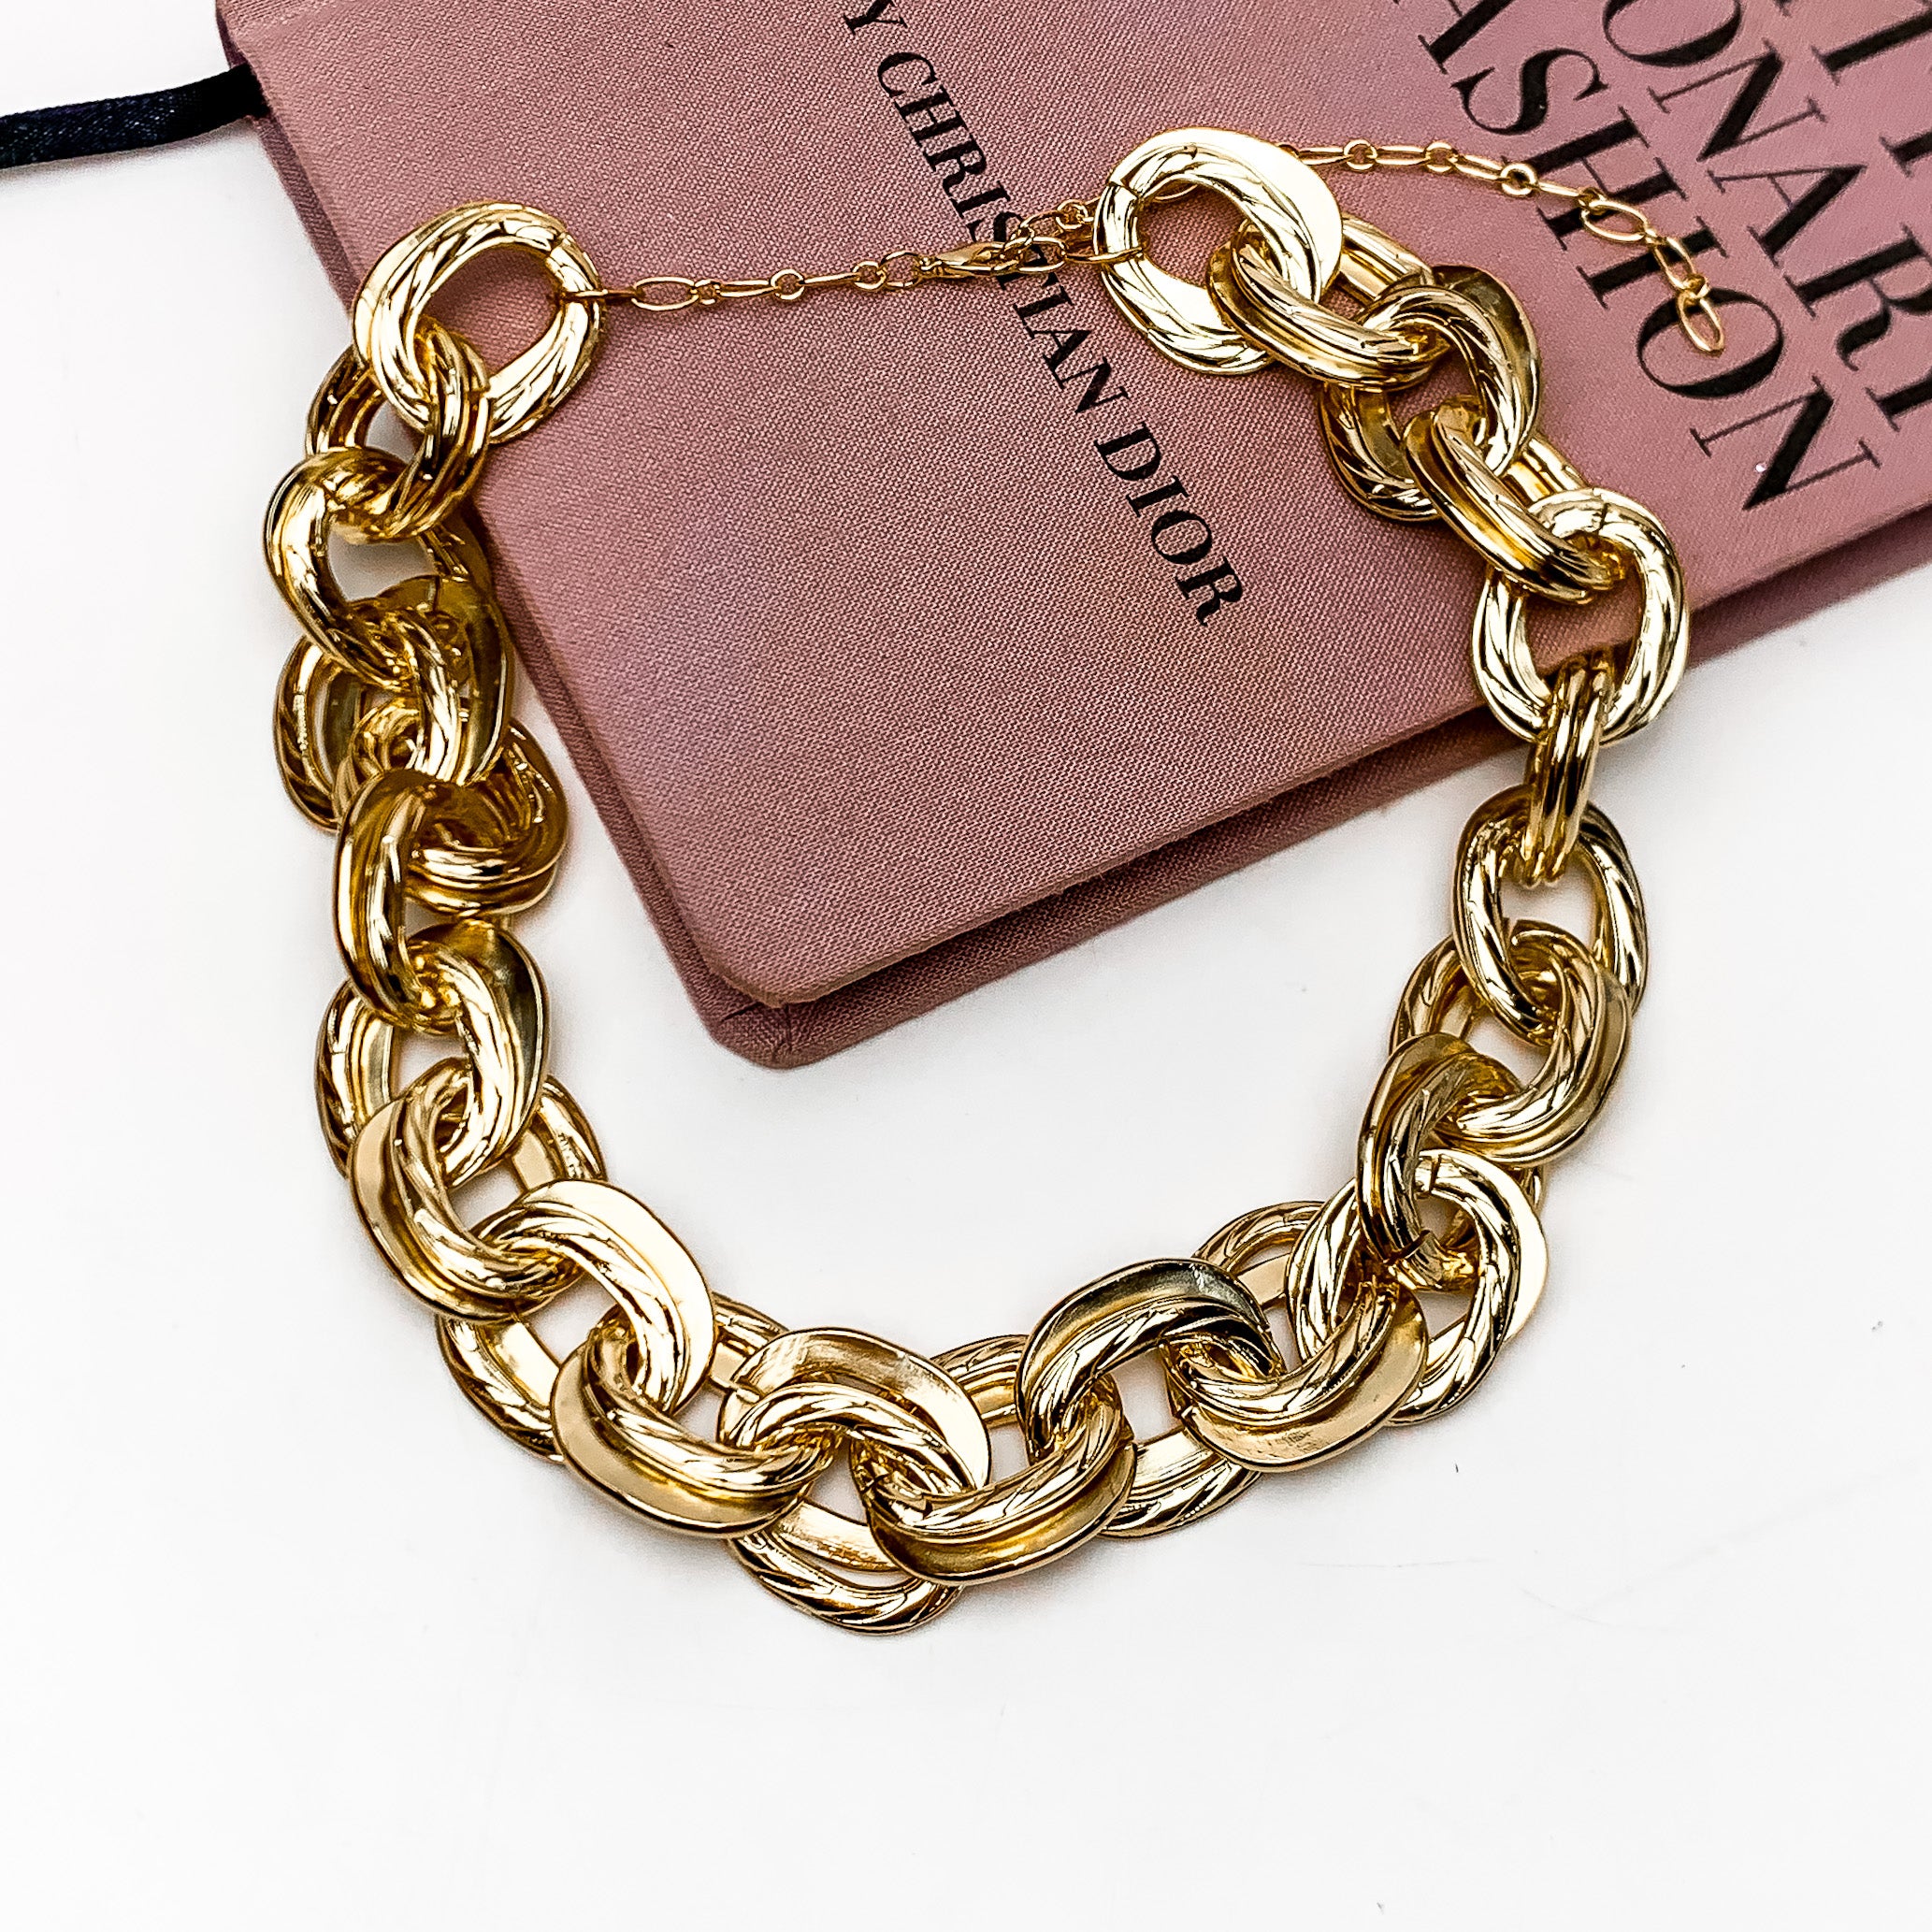 Fall Fashion Gold Tone Chain Necklace. This gold chain necklace is pictured on a white background with a pink book behind it.